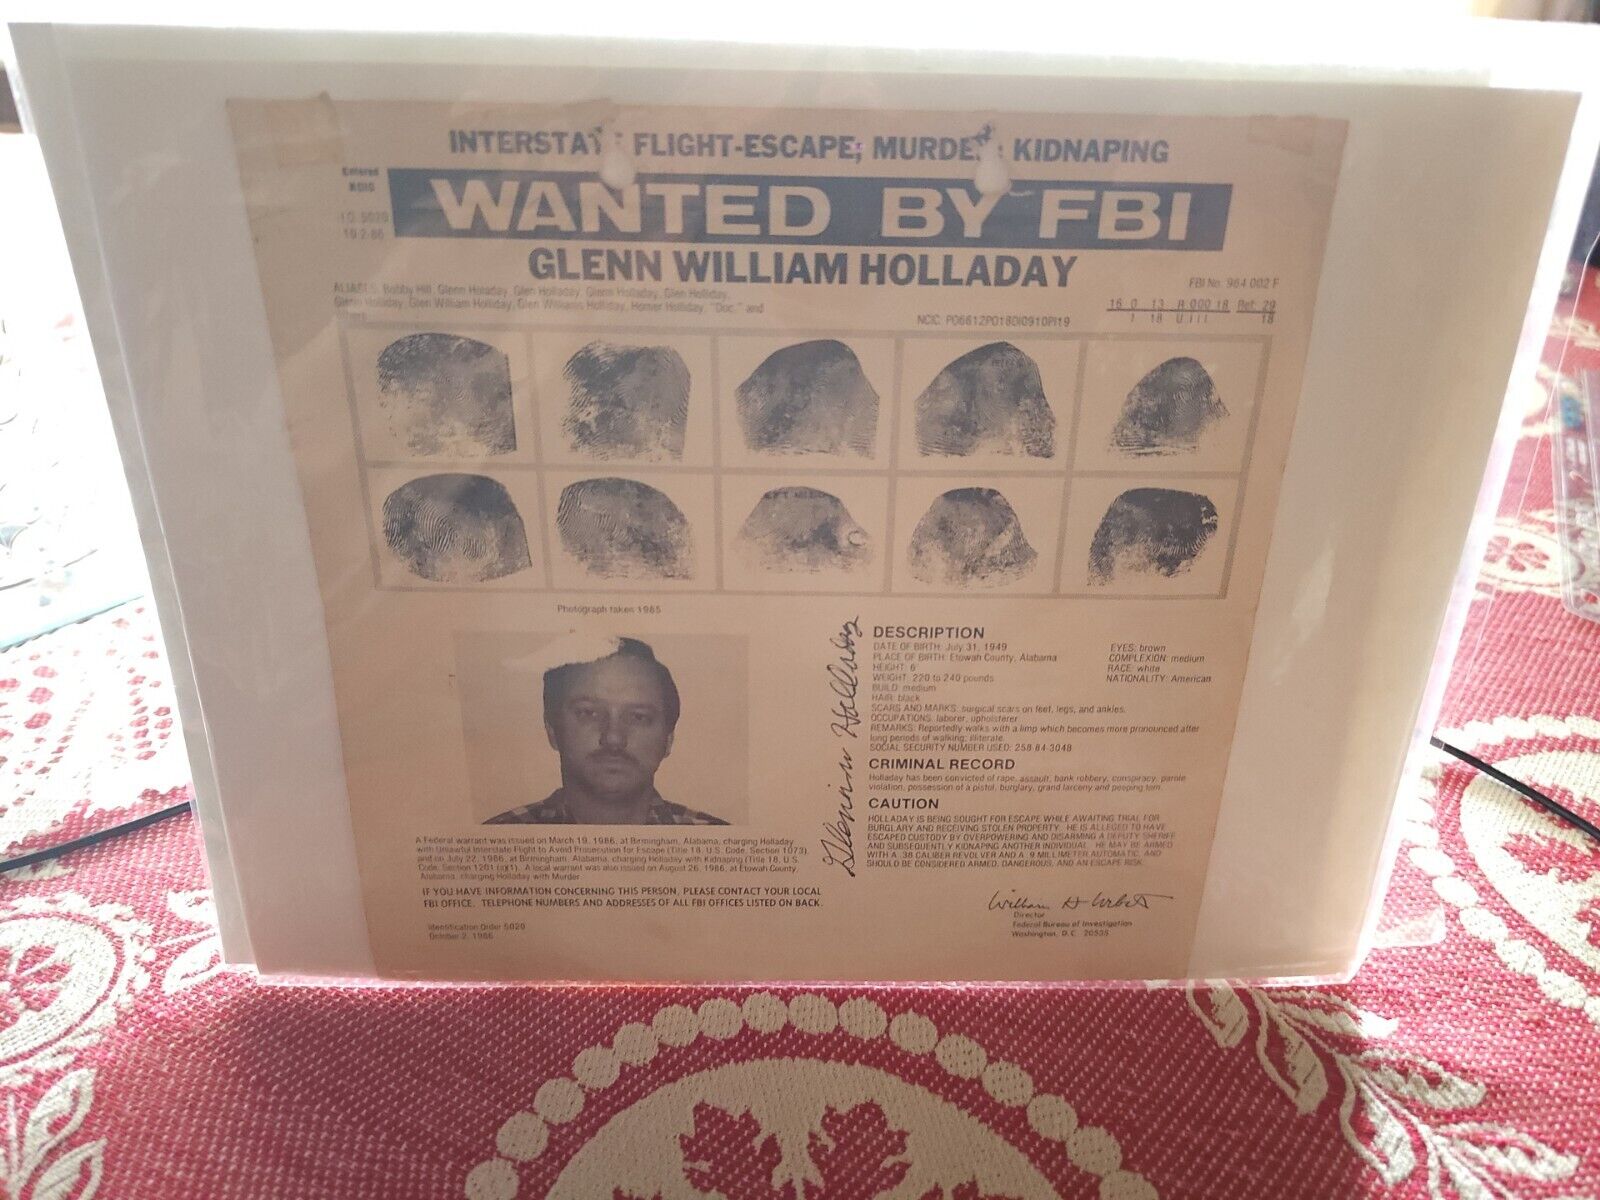 1986 WANTED BY FBI POSTER GLENN WILLIAM HOLLADAY SIGNED MURDER KIDNAPPING ESCAPE